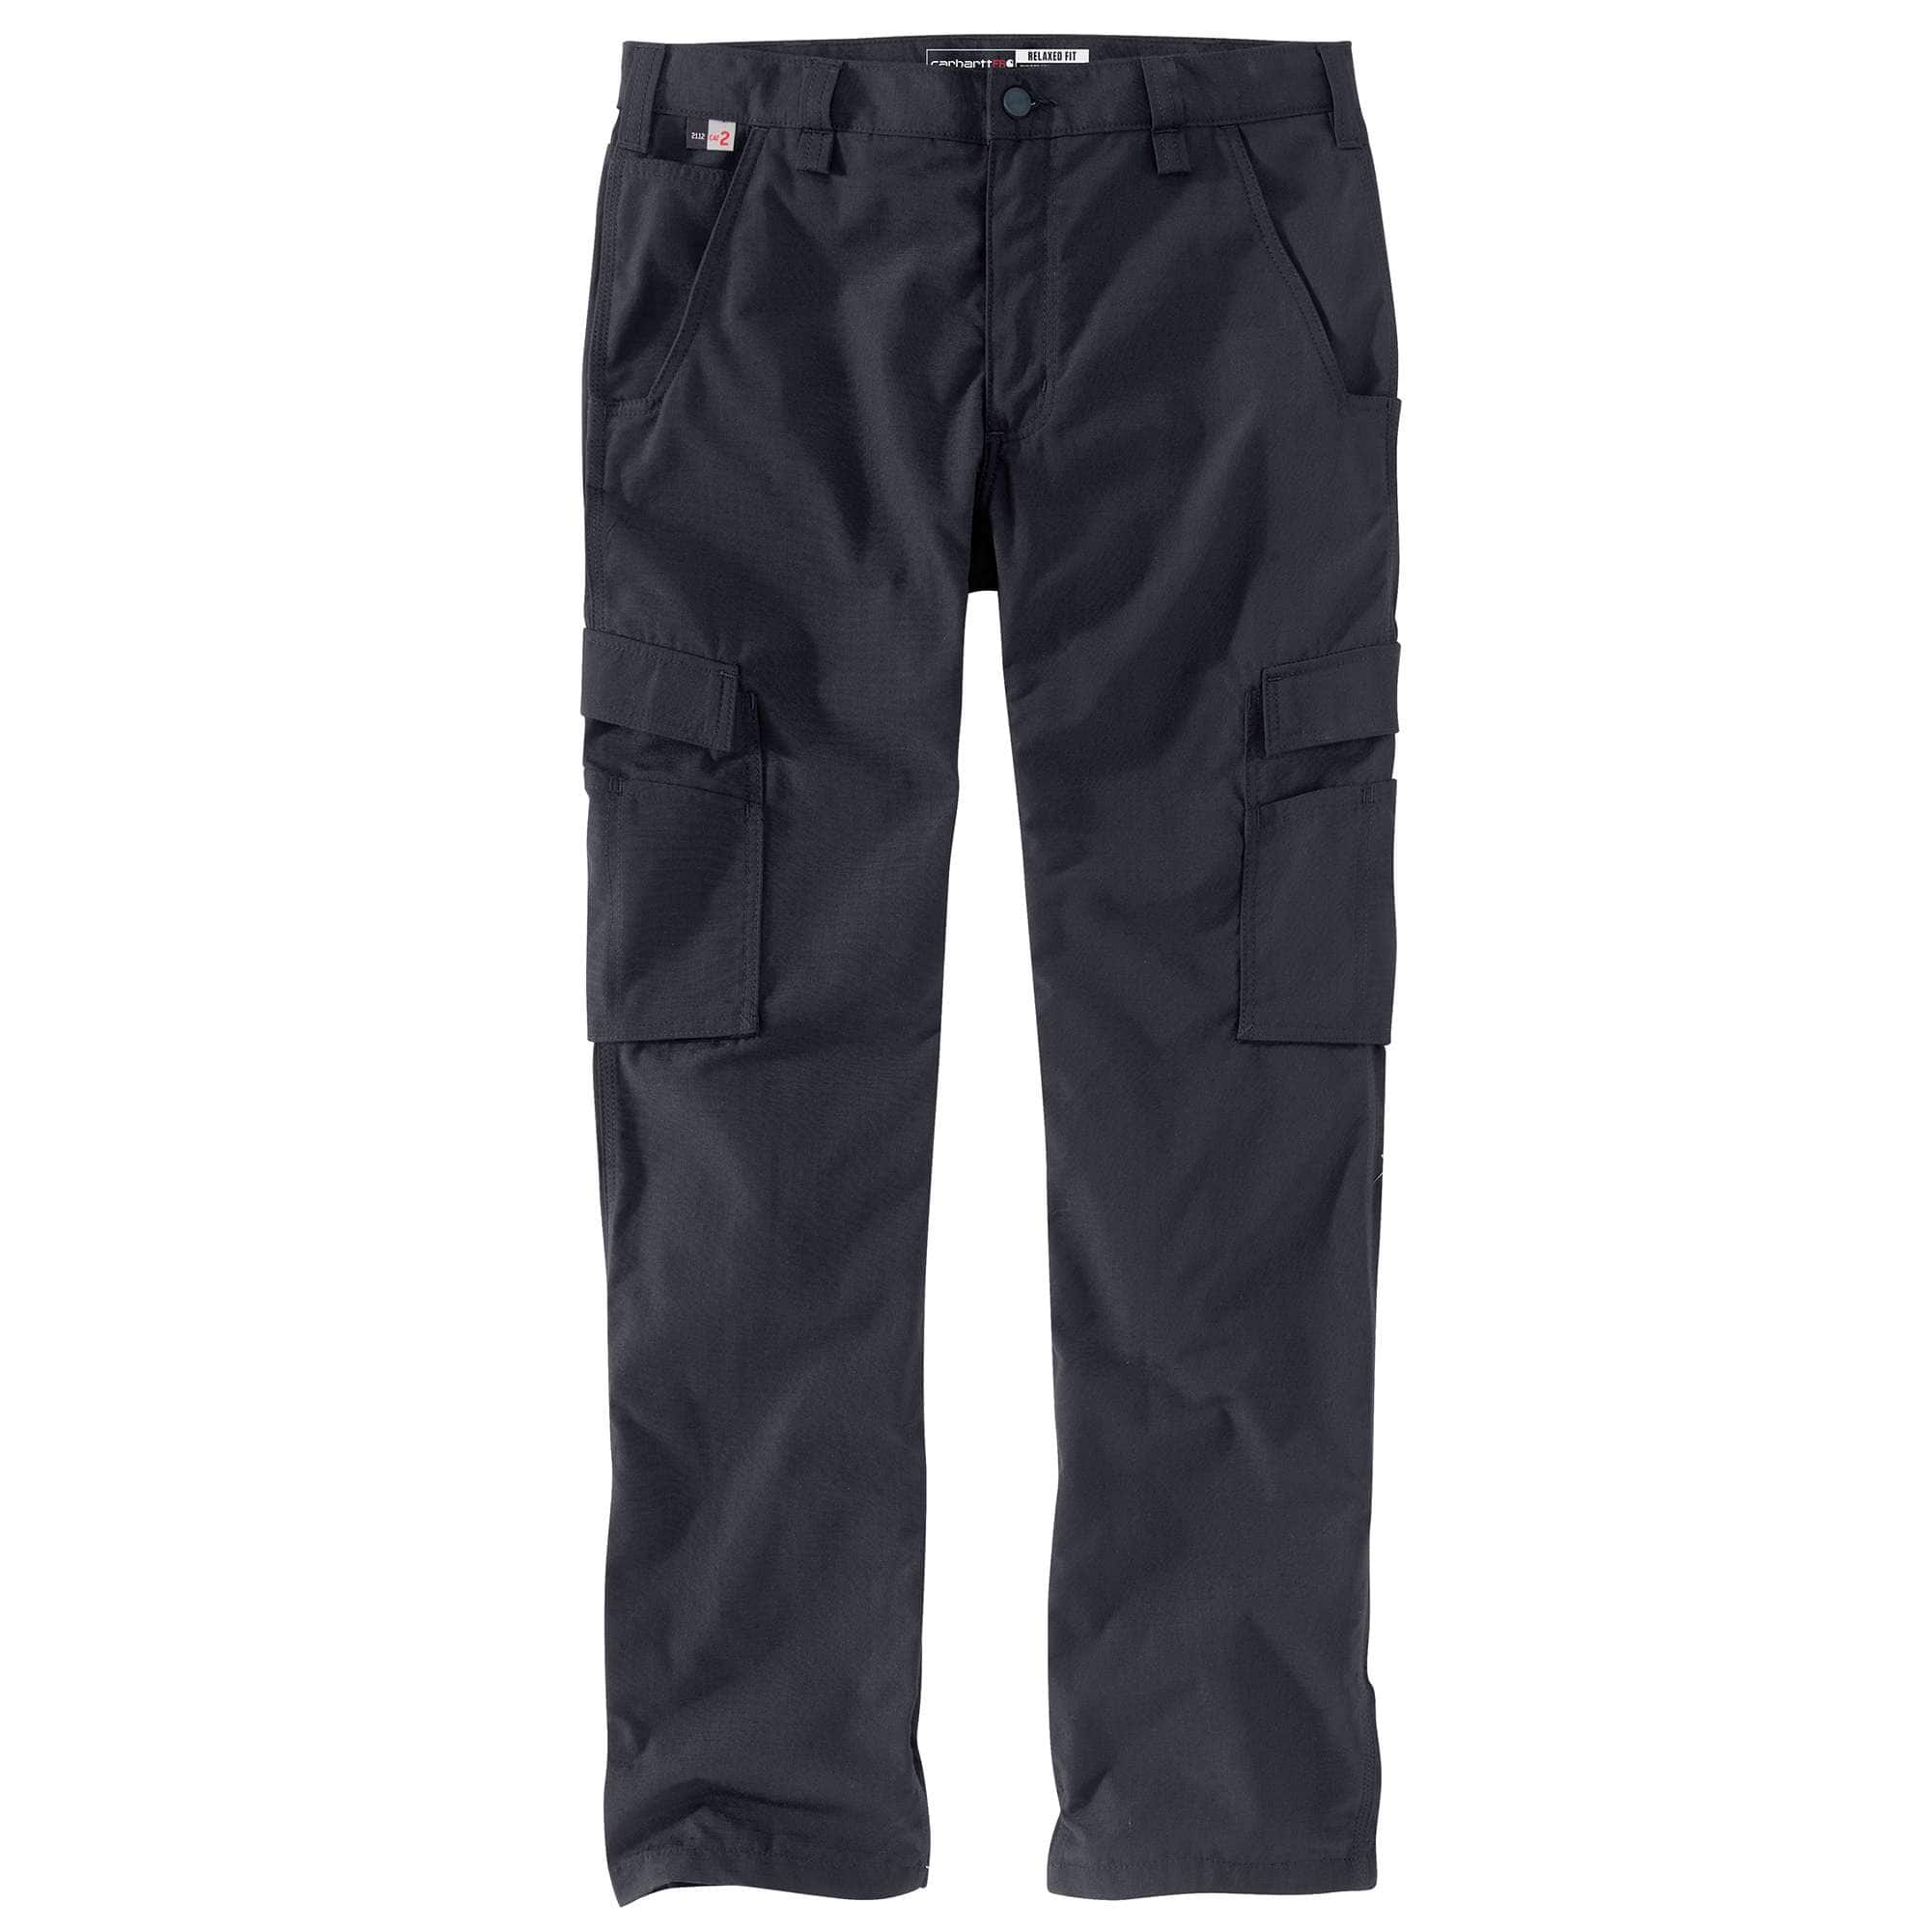 Men's Force Relaxed Fit Work Pant